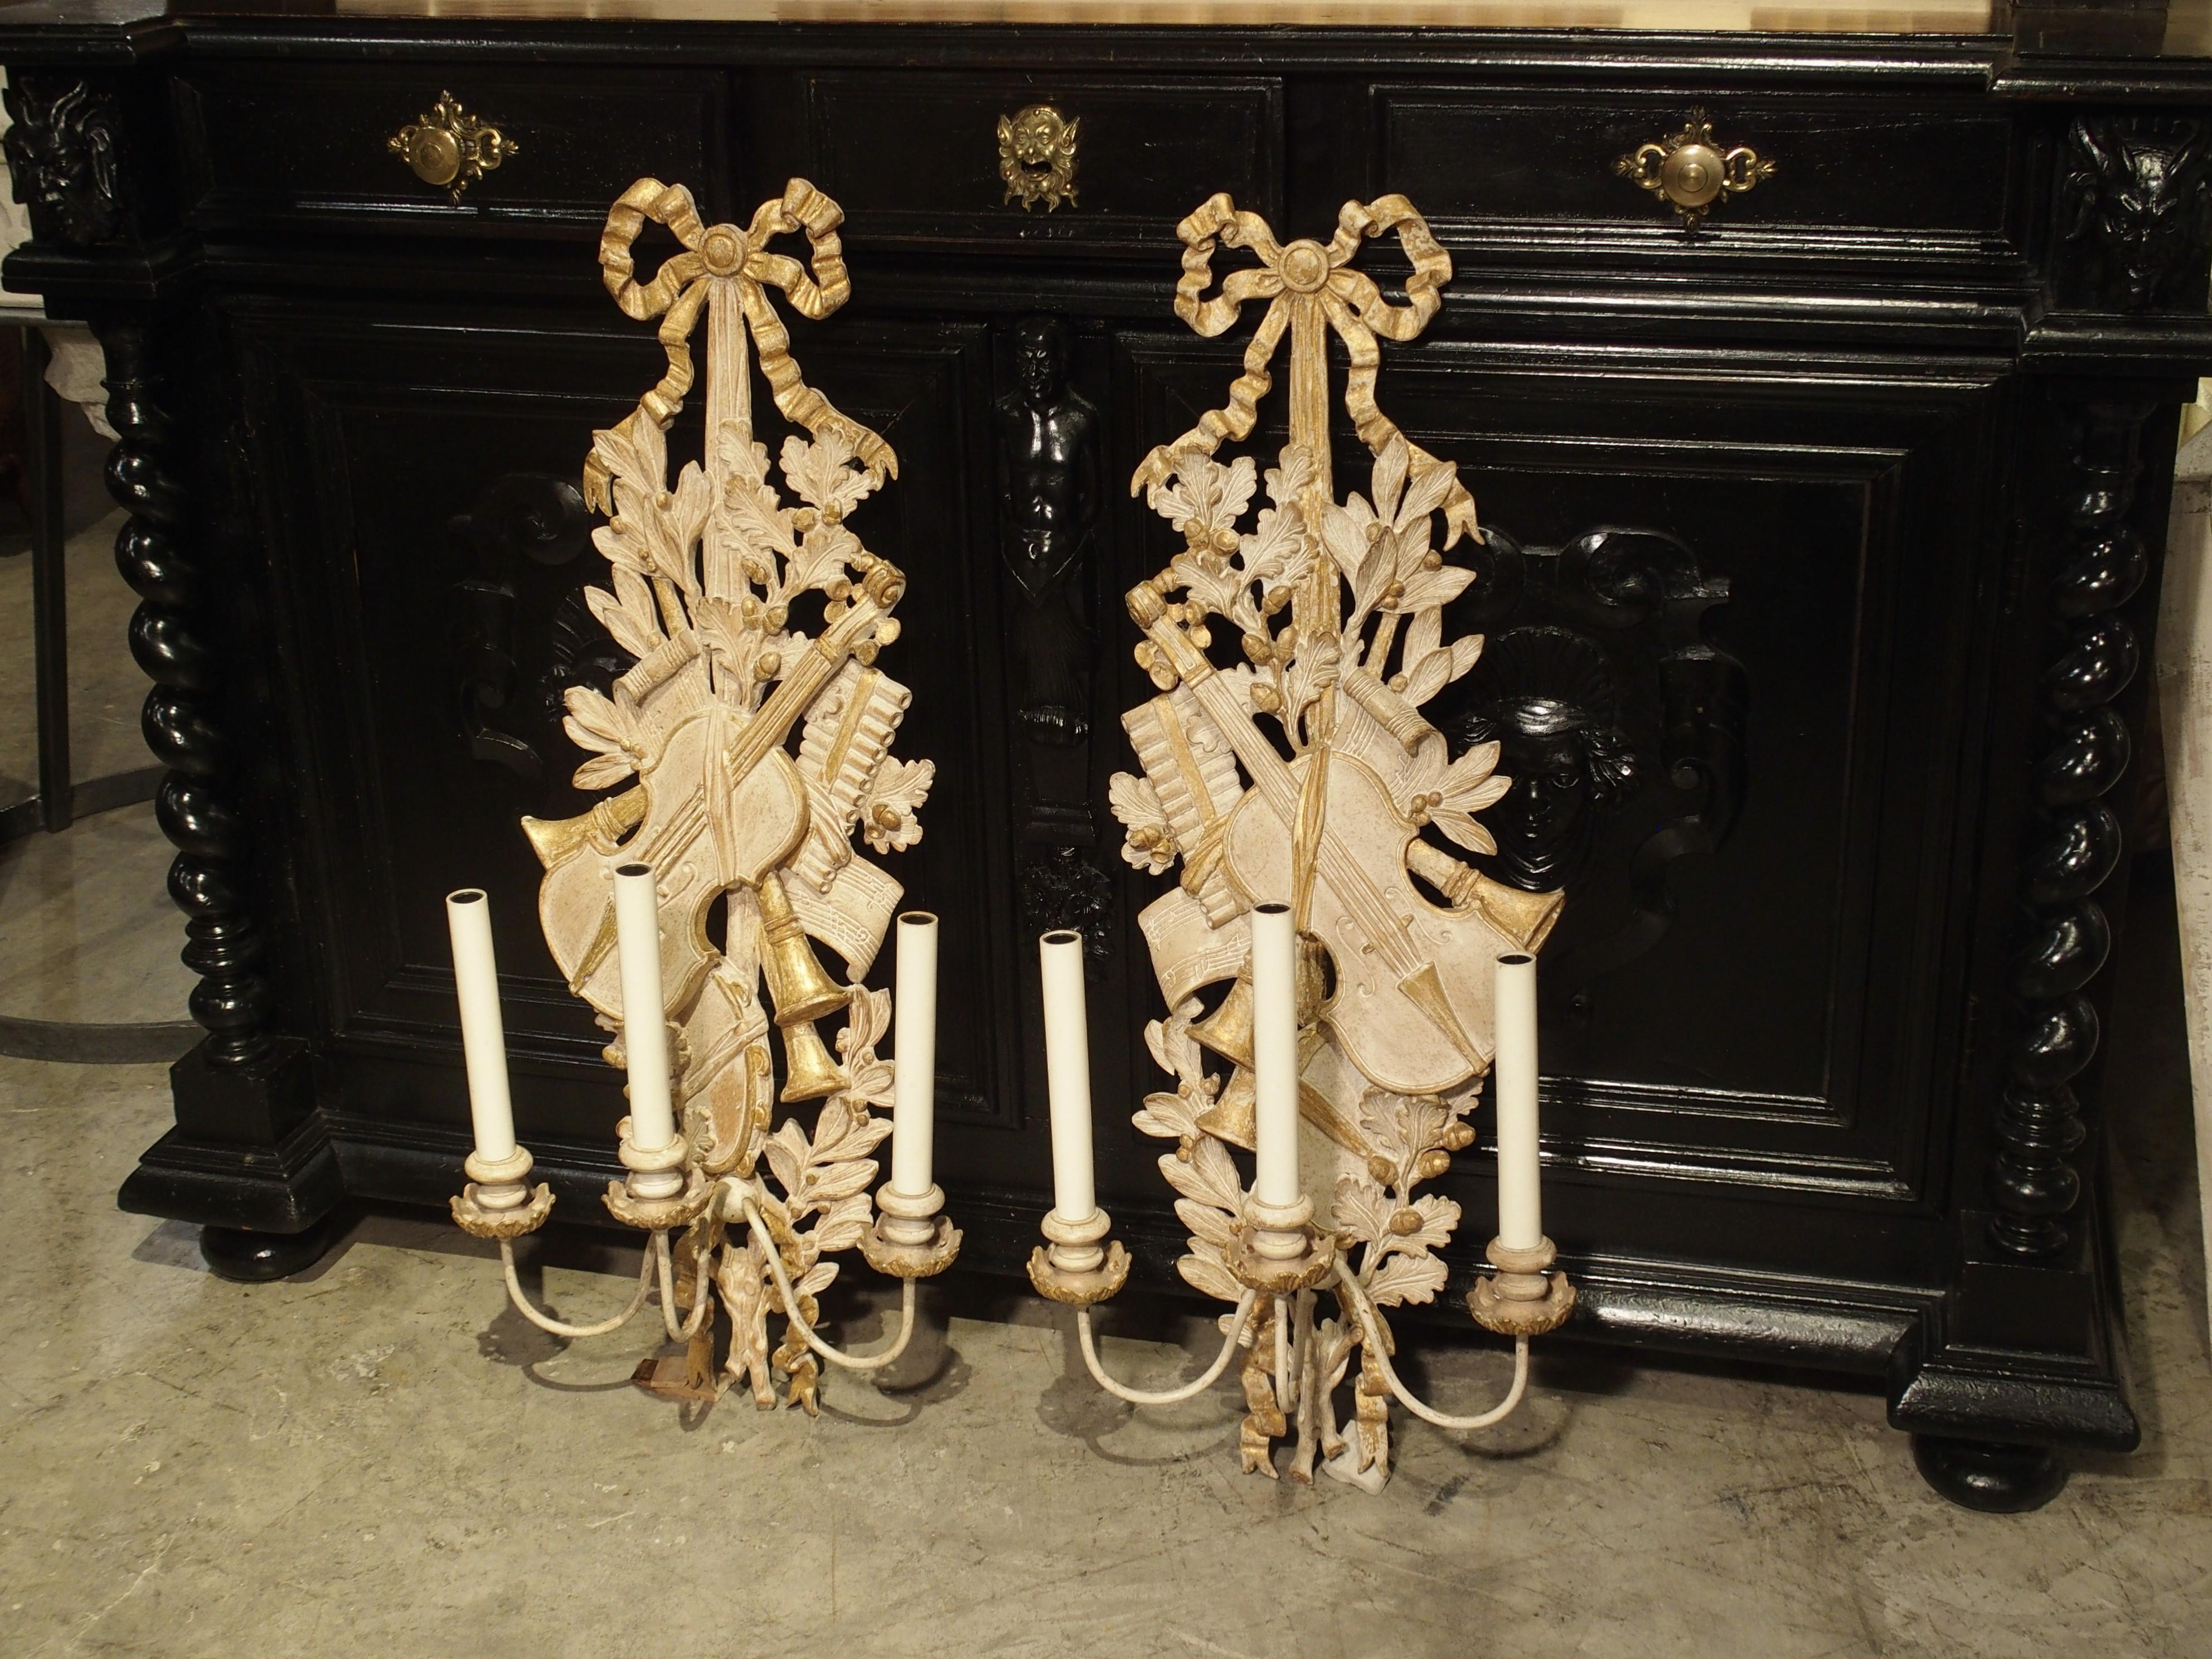 This pair of French sconces has been carved out of Linden wood, in the Louis XVI style. The 3-armed sconces are painted in a light cream and gold, and the carvings represent musical instruments, laurel branches, and oak leaves with acorns, all hung